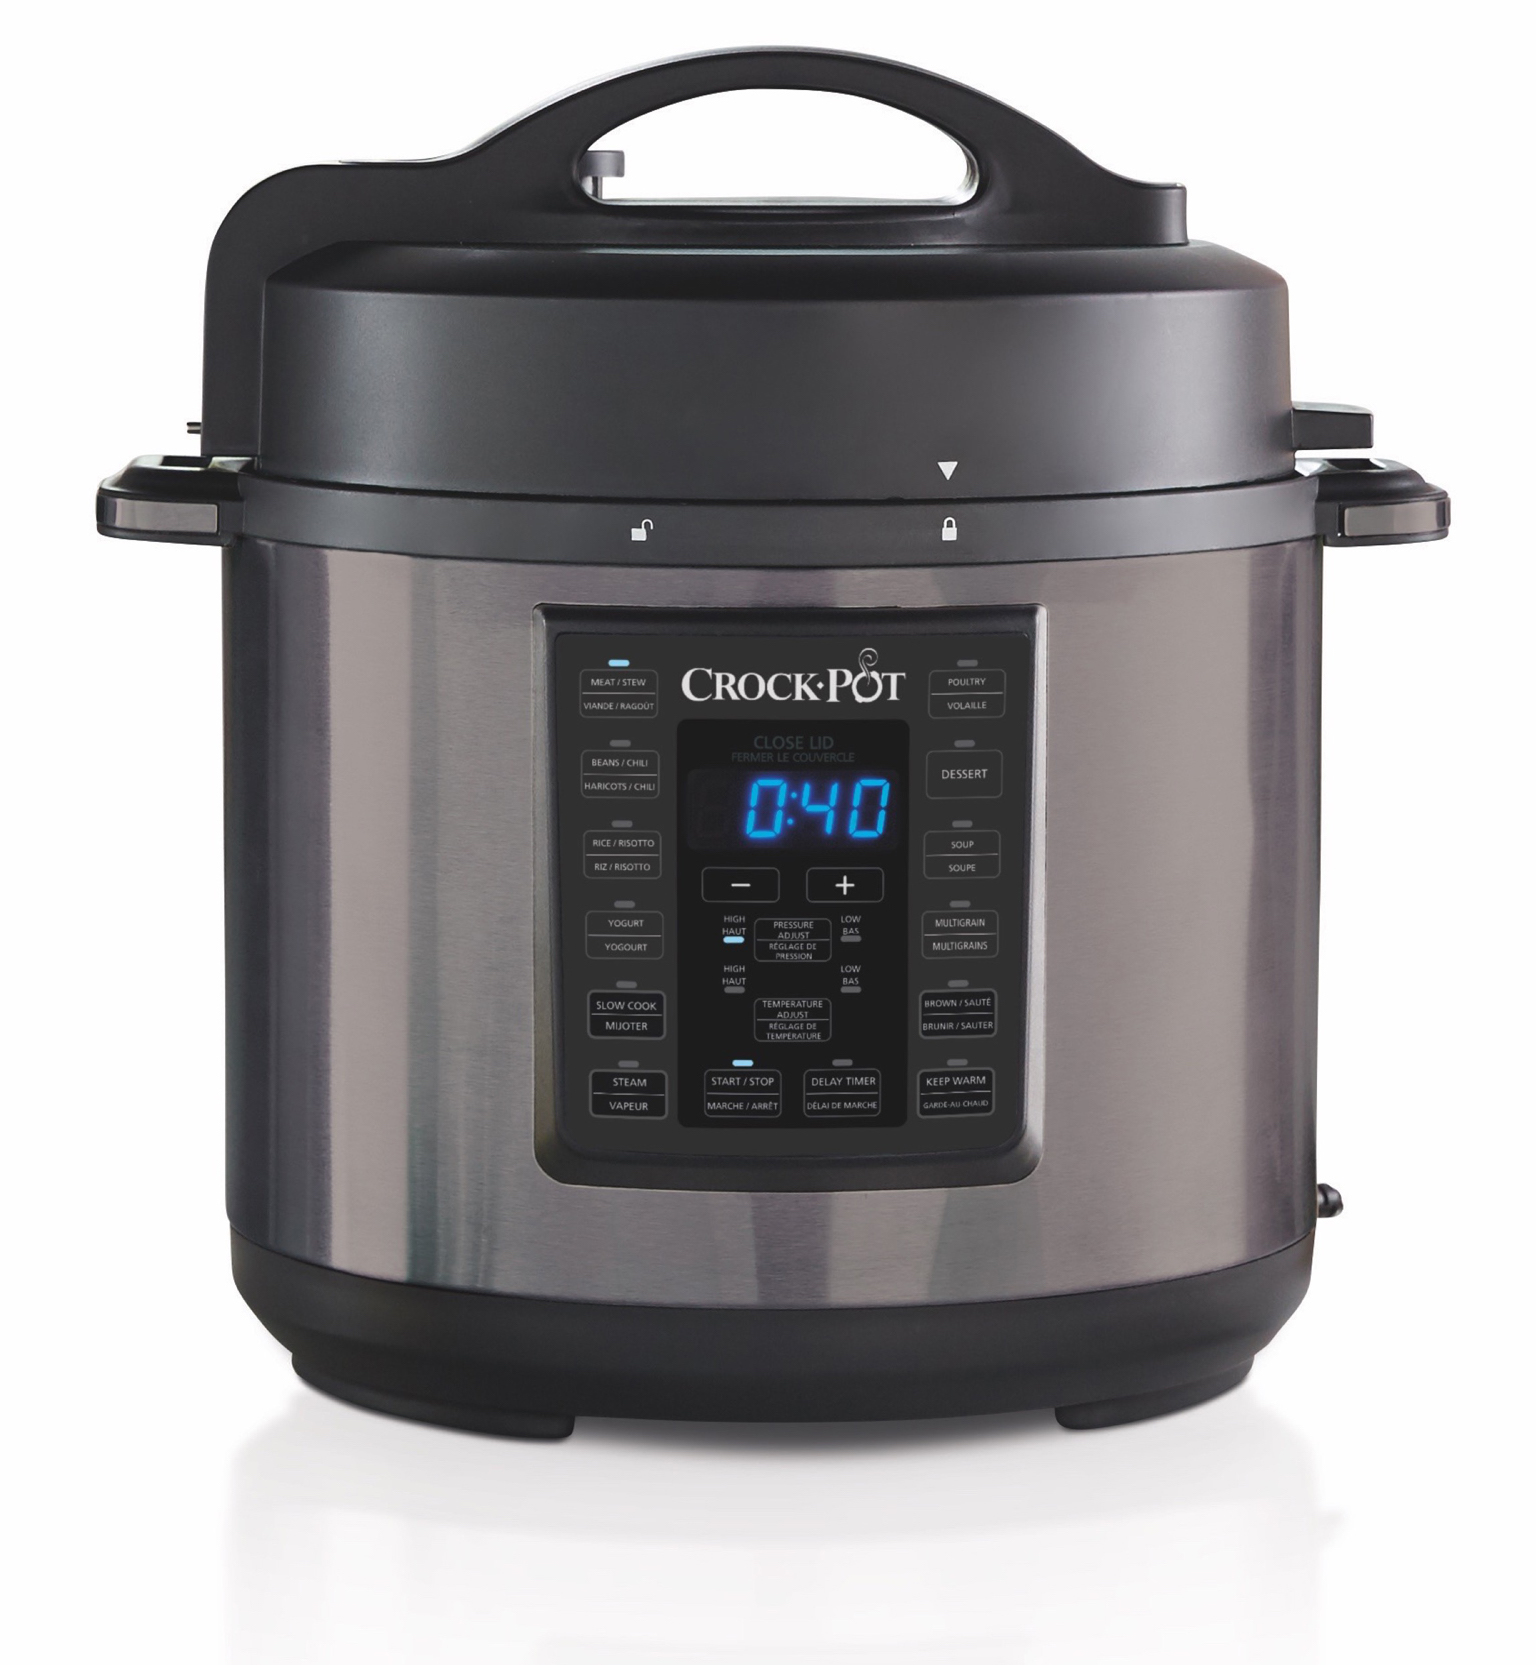 Crock-Pot 6 Qt 8-in-1 Multi-Use Express Crock Programmable Pressure Cooker, Slow Cooker, Sauté, and Steamer, Black Stainless Steel - image 1 of 10